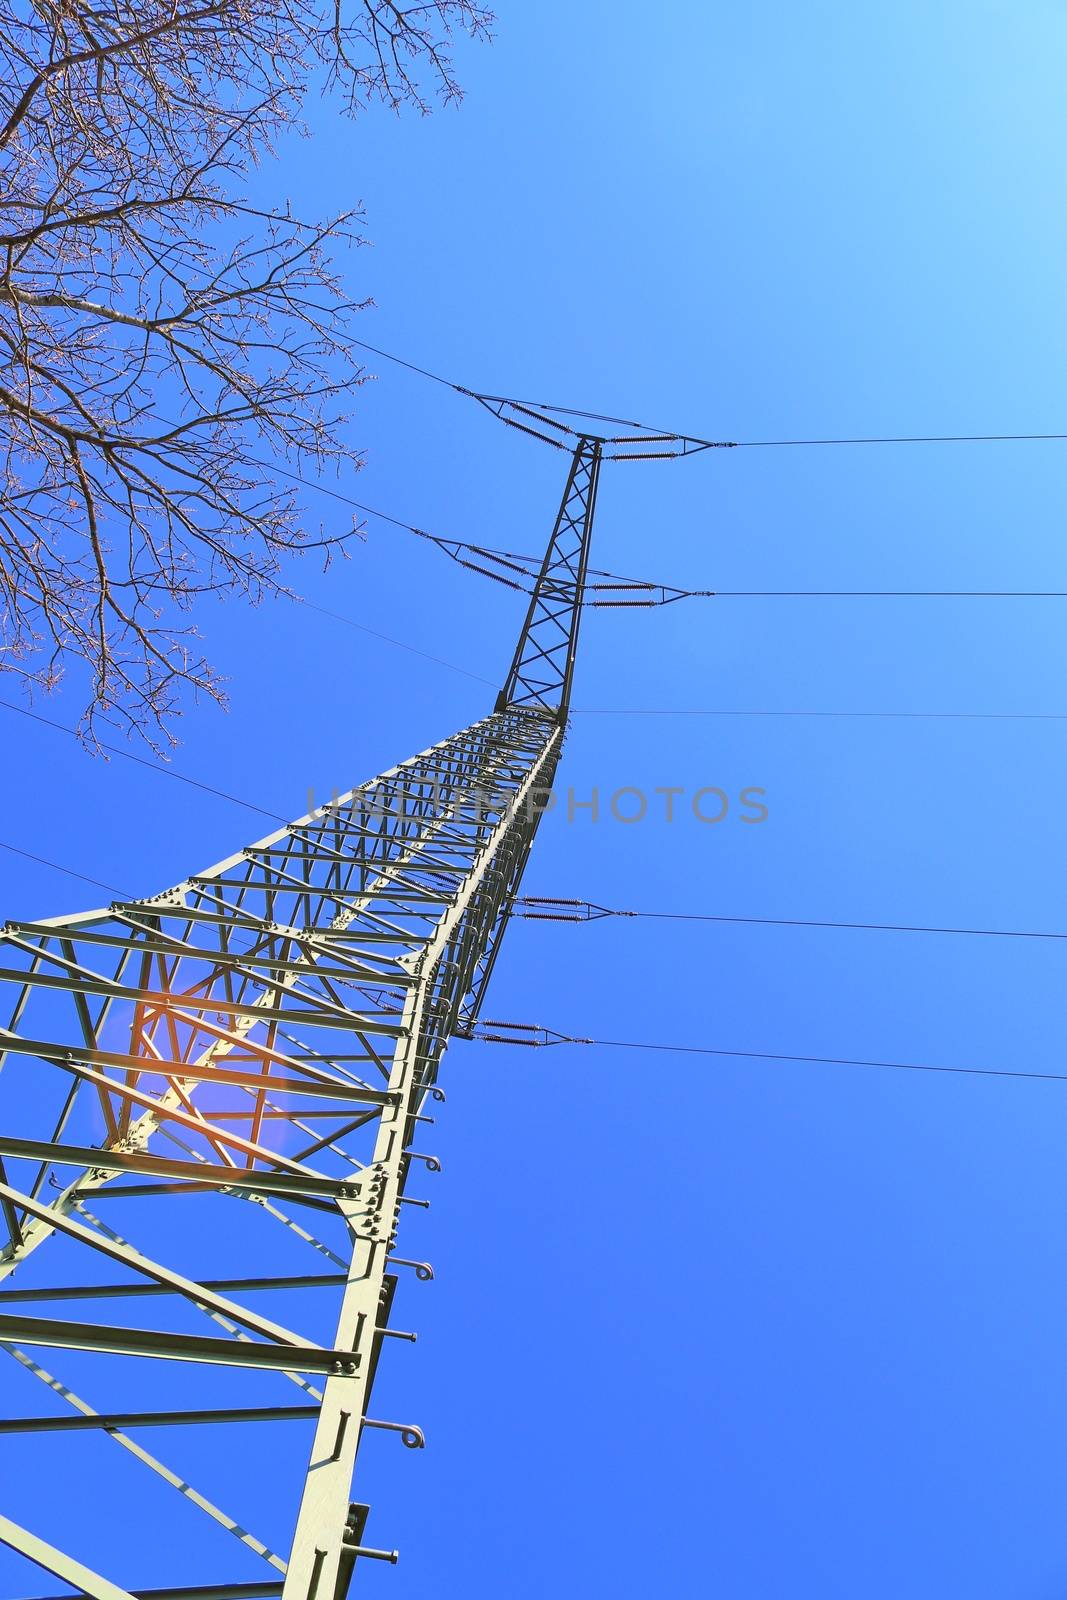 Close up view on a big power pylon transporting electricity in a by MP_foto71